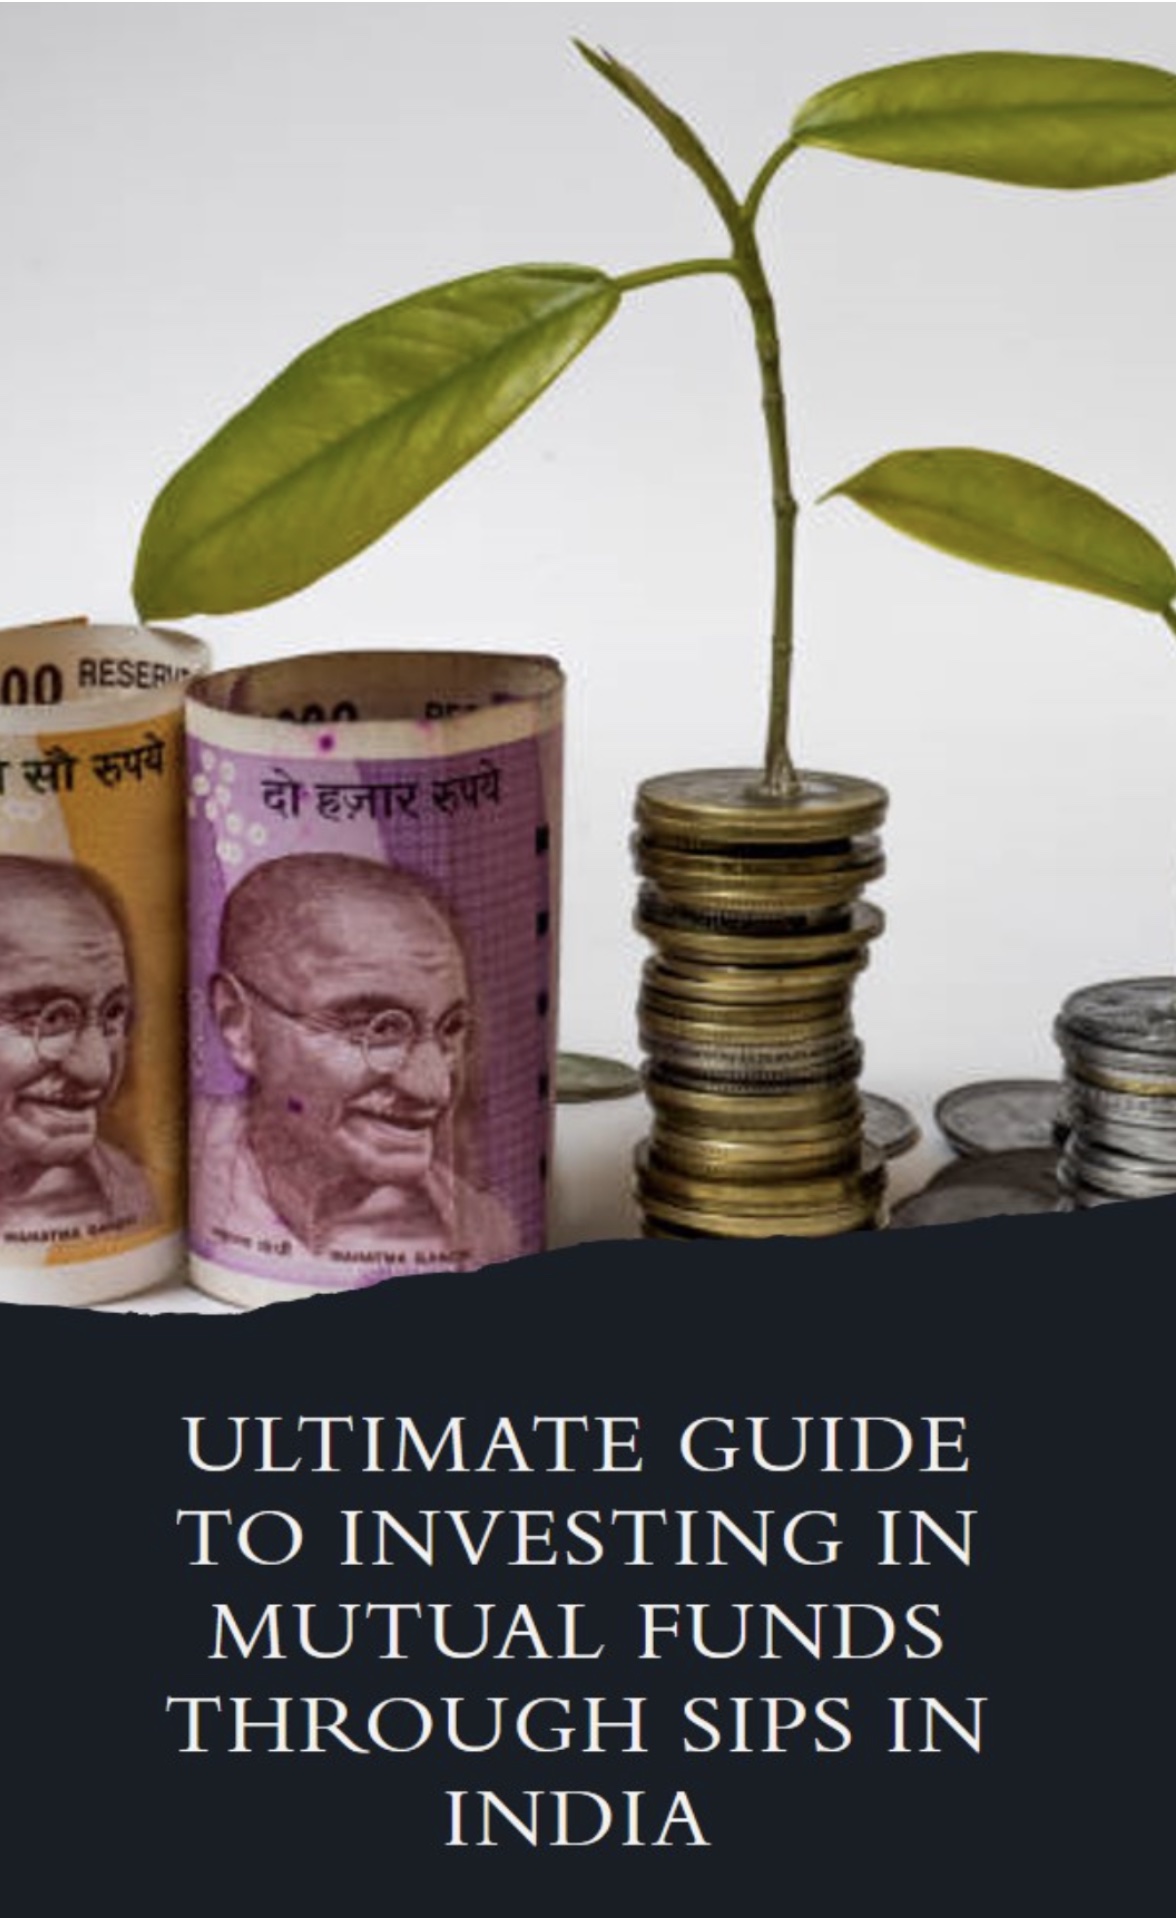 Ultimate Guide to Investing in Mutual Funds through SIPs in India